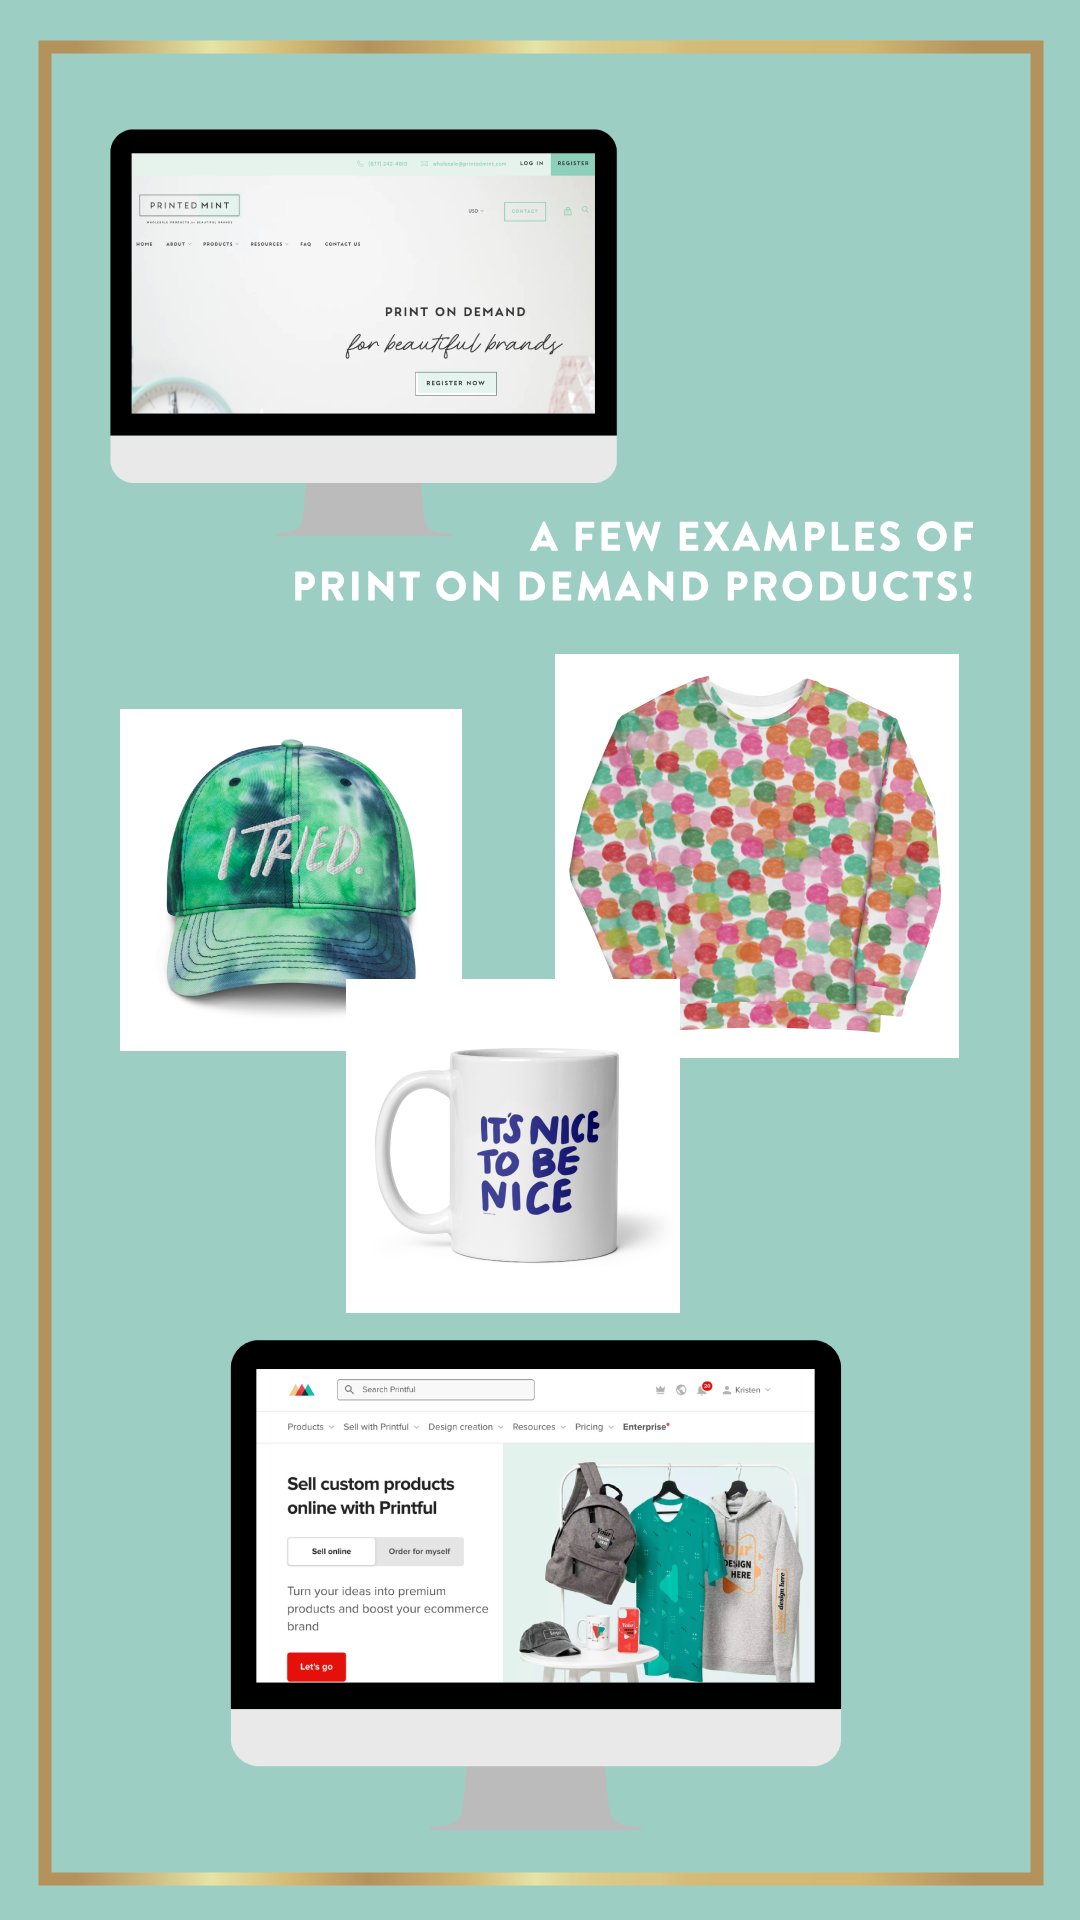 Kristen Ley What Is Print On Demand And Is It Right For My Business